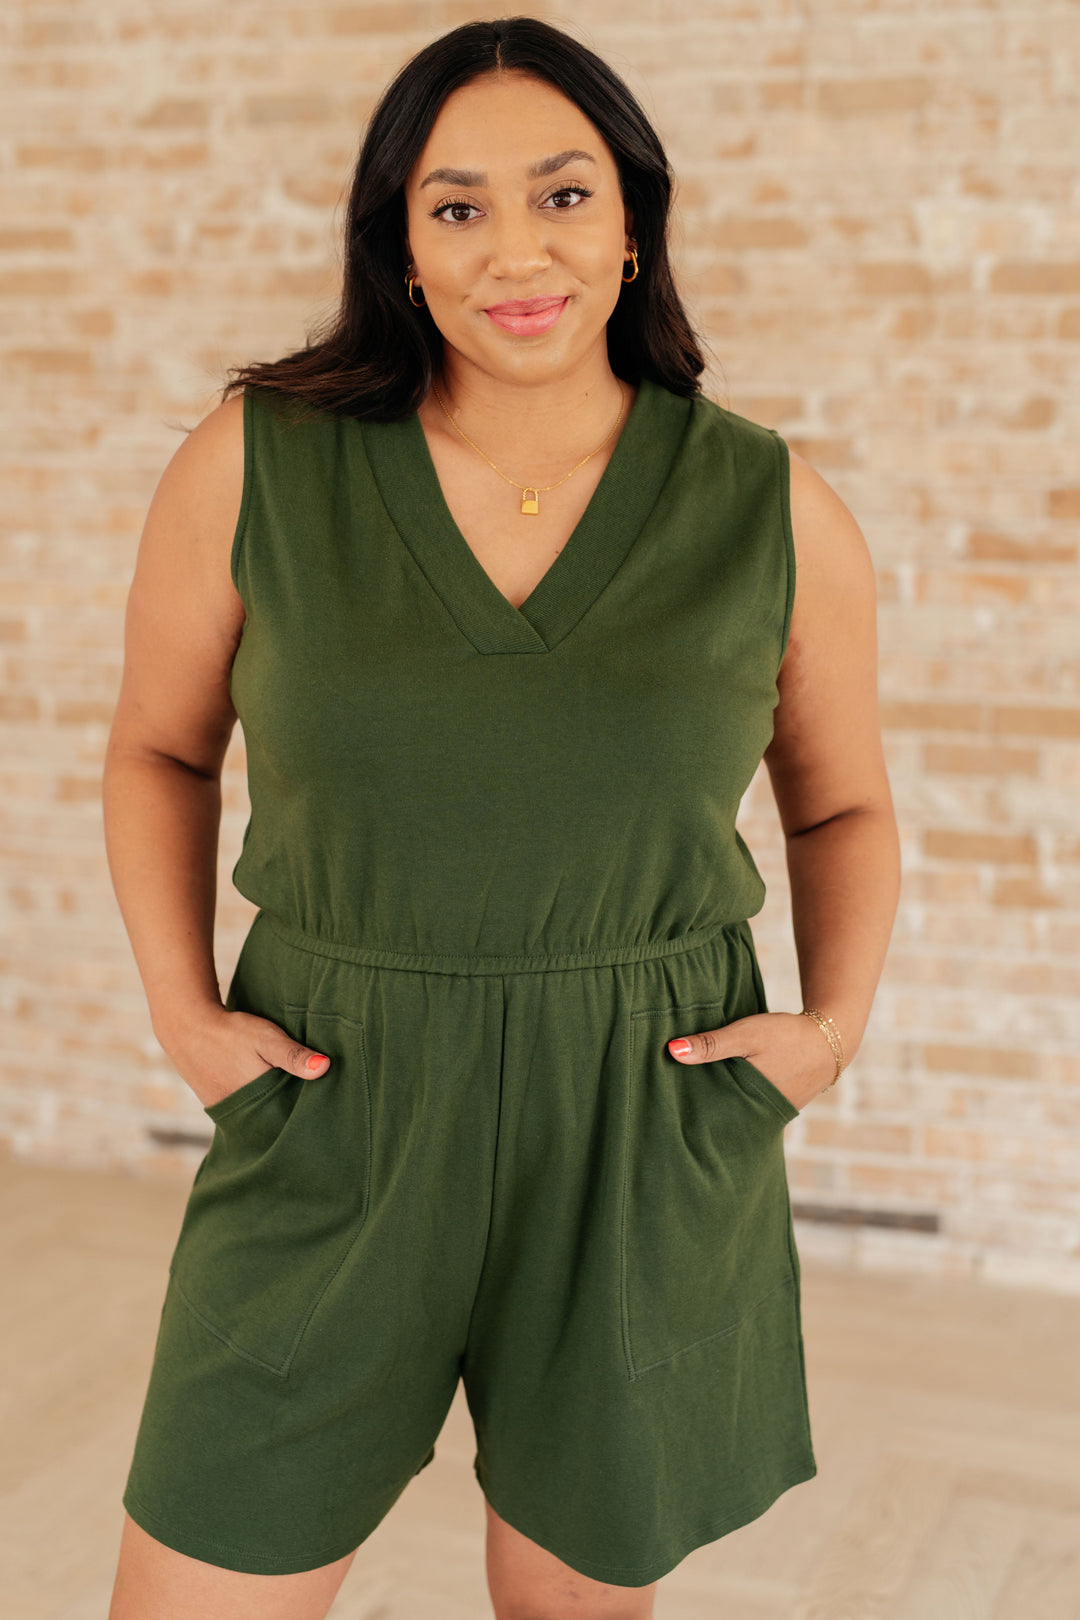 Sleeveless V-Neck Romper in Army Green-Jumpsuits & Rompers-Inspired by Justeen-Women's Clothing Boutique in Chicago, Illinois